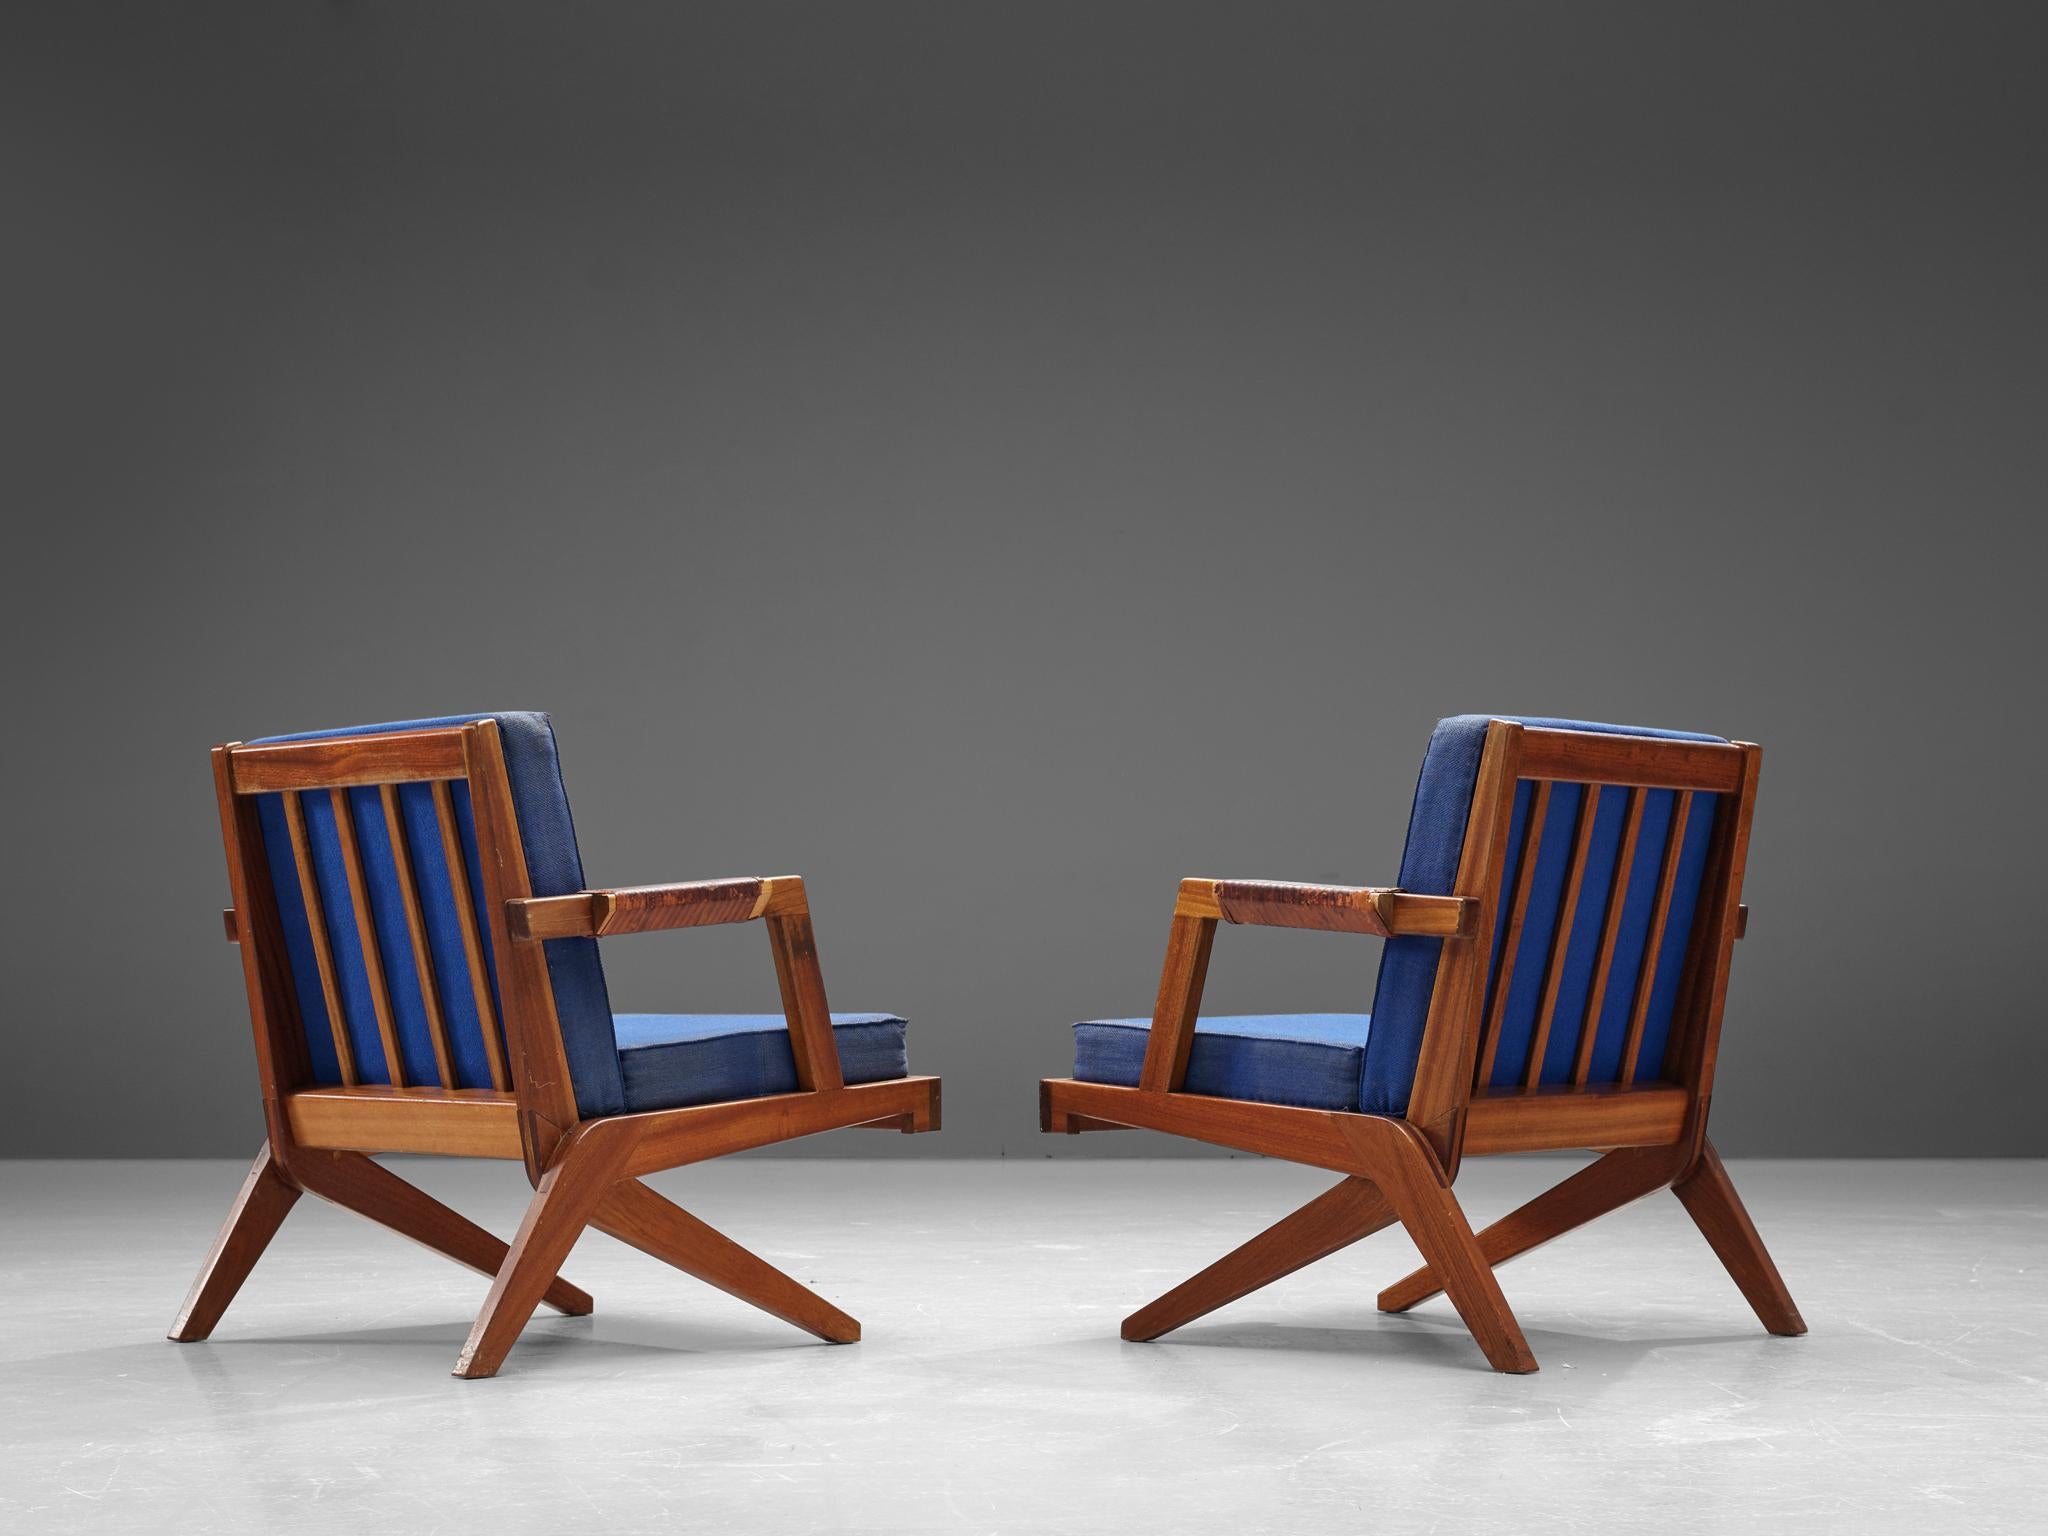 Finnish Olavi Hanninen Pair of 'Bumerang' Chairs with Kingsblue Upholstery